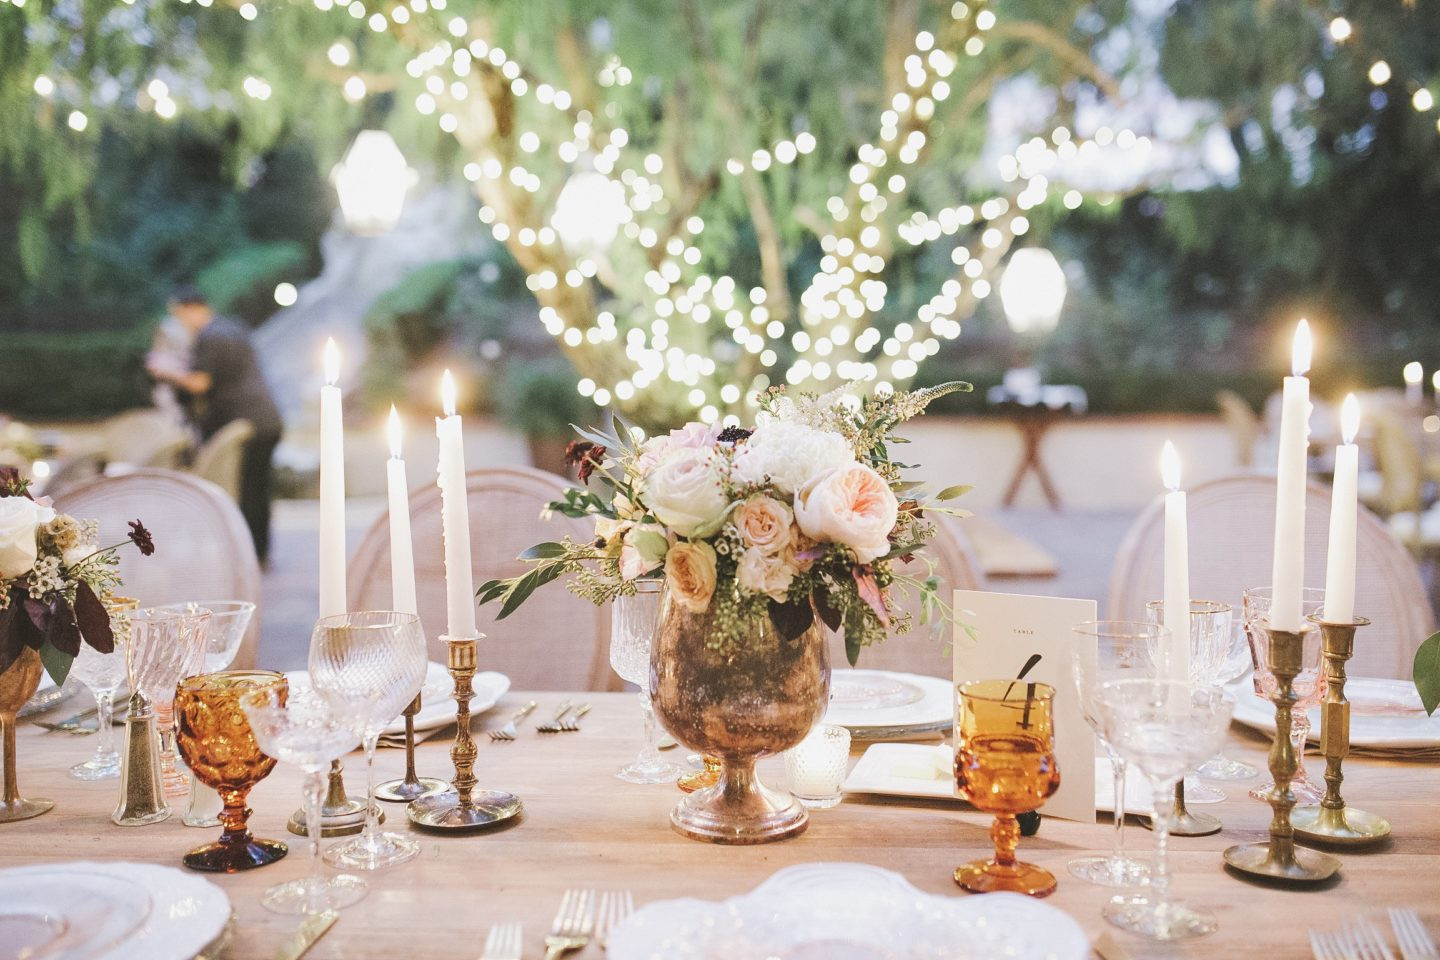 How To Pick A Wedding Theme
 How Pick a Wedding Theme & Decor Live Your Style